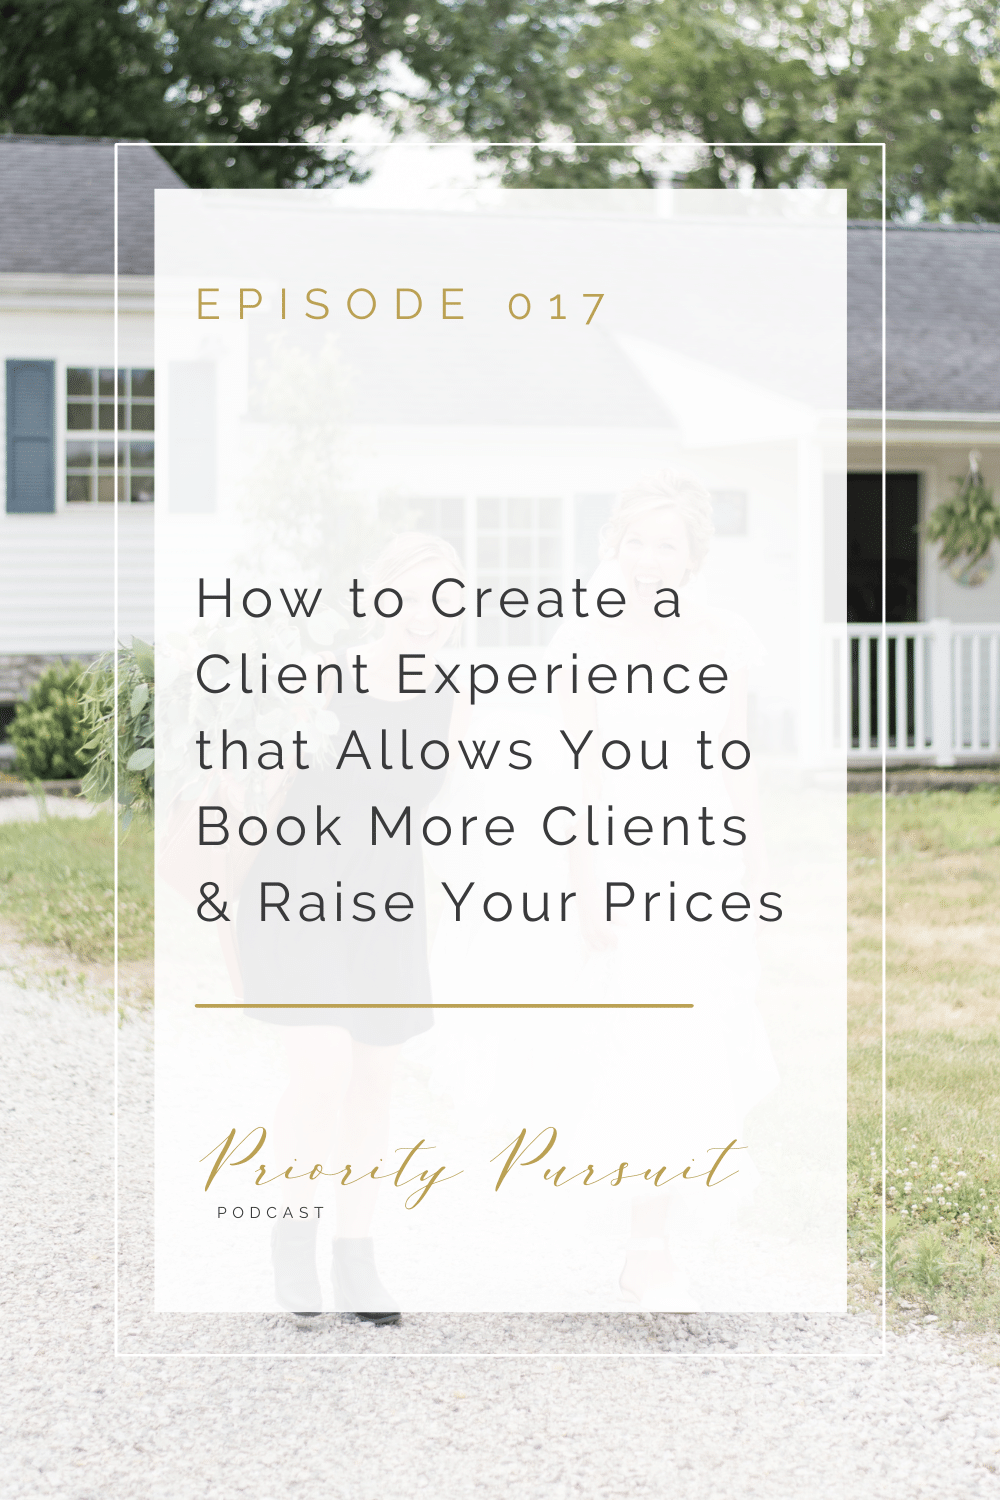 Victoria Rayburn explains how to create a client experience that allows you to book more clients and raise your prices in this episode of “Priority Pursuit.” 